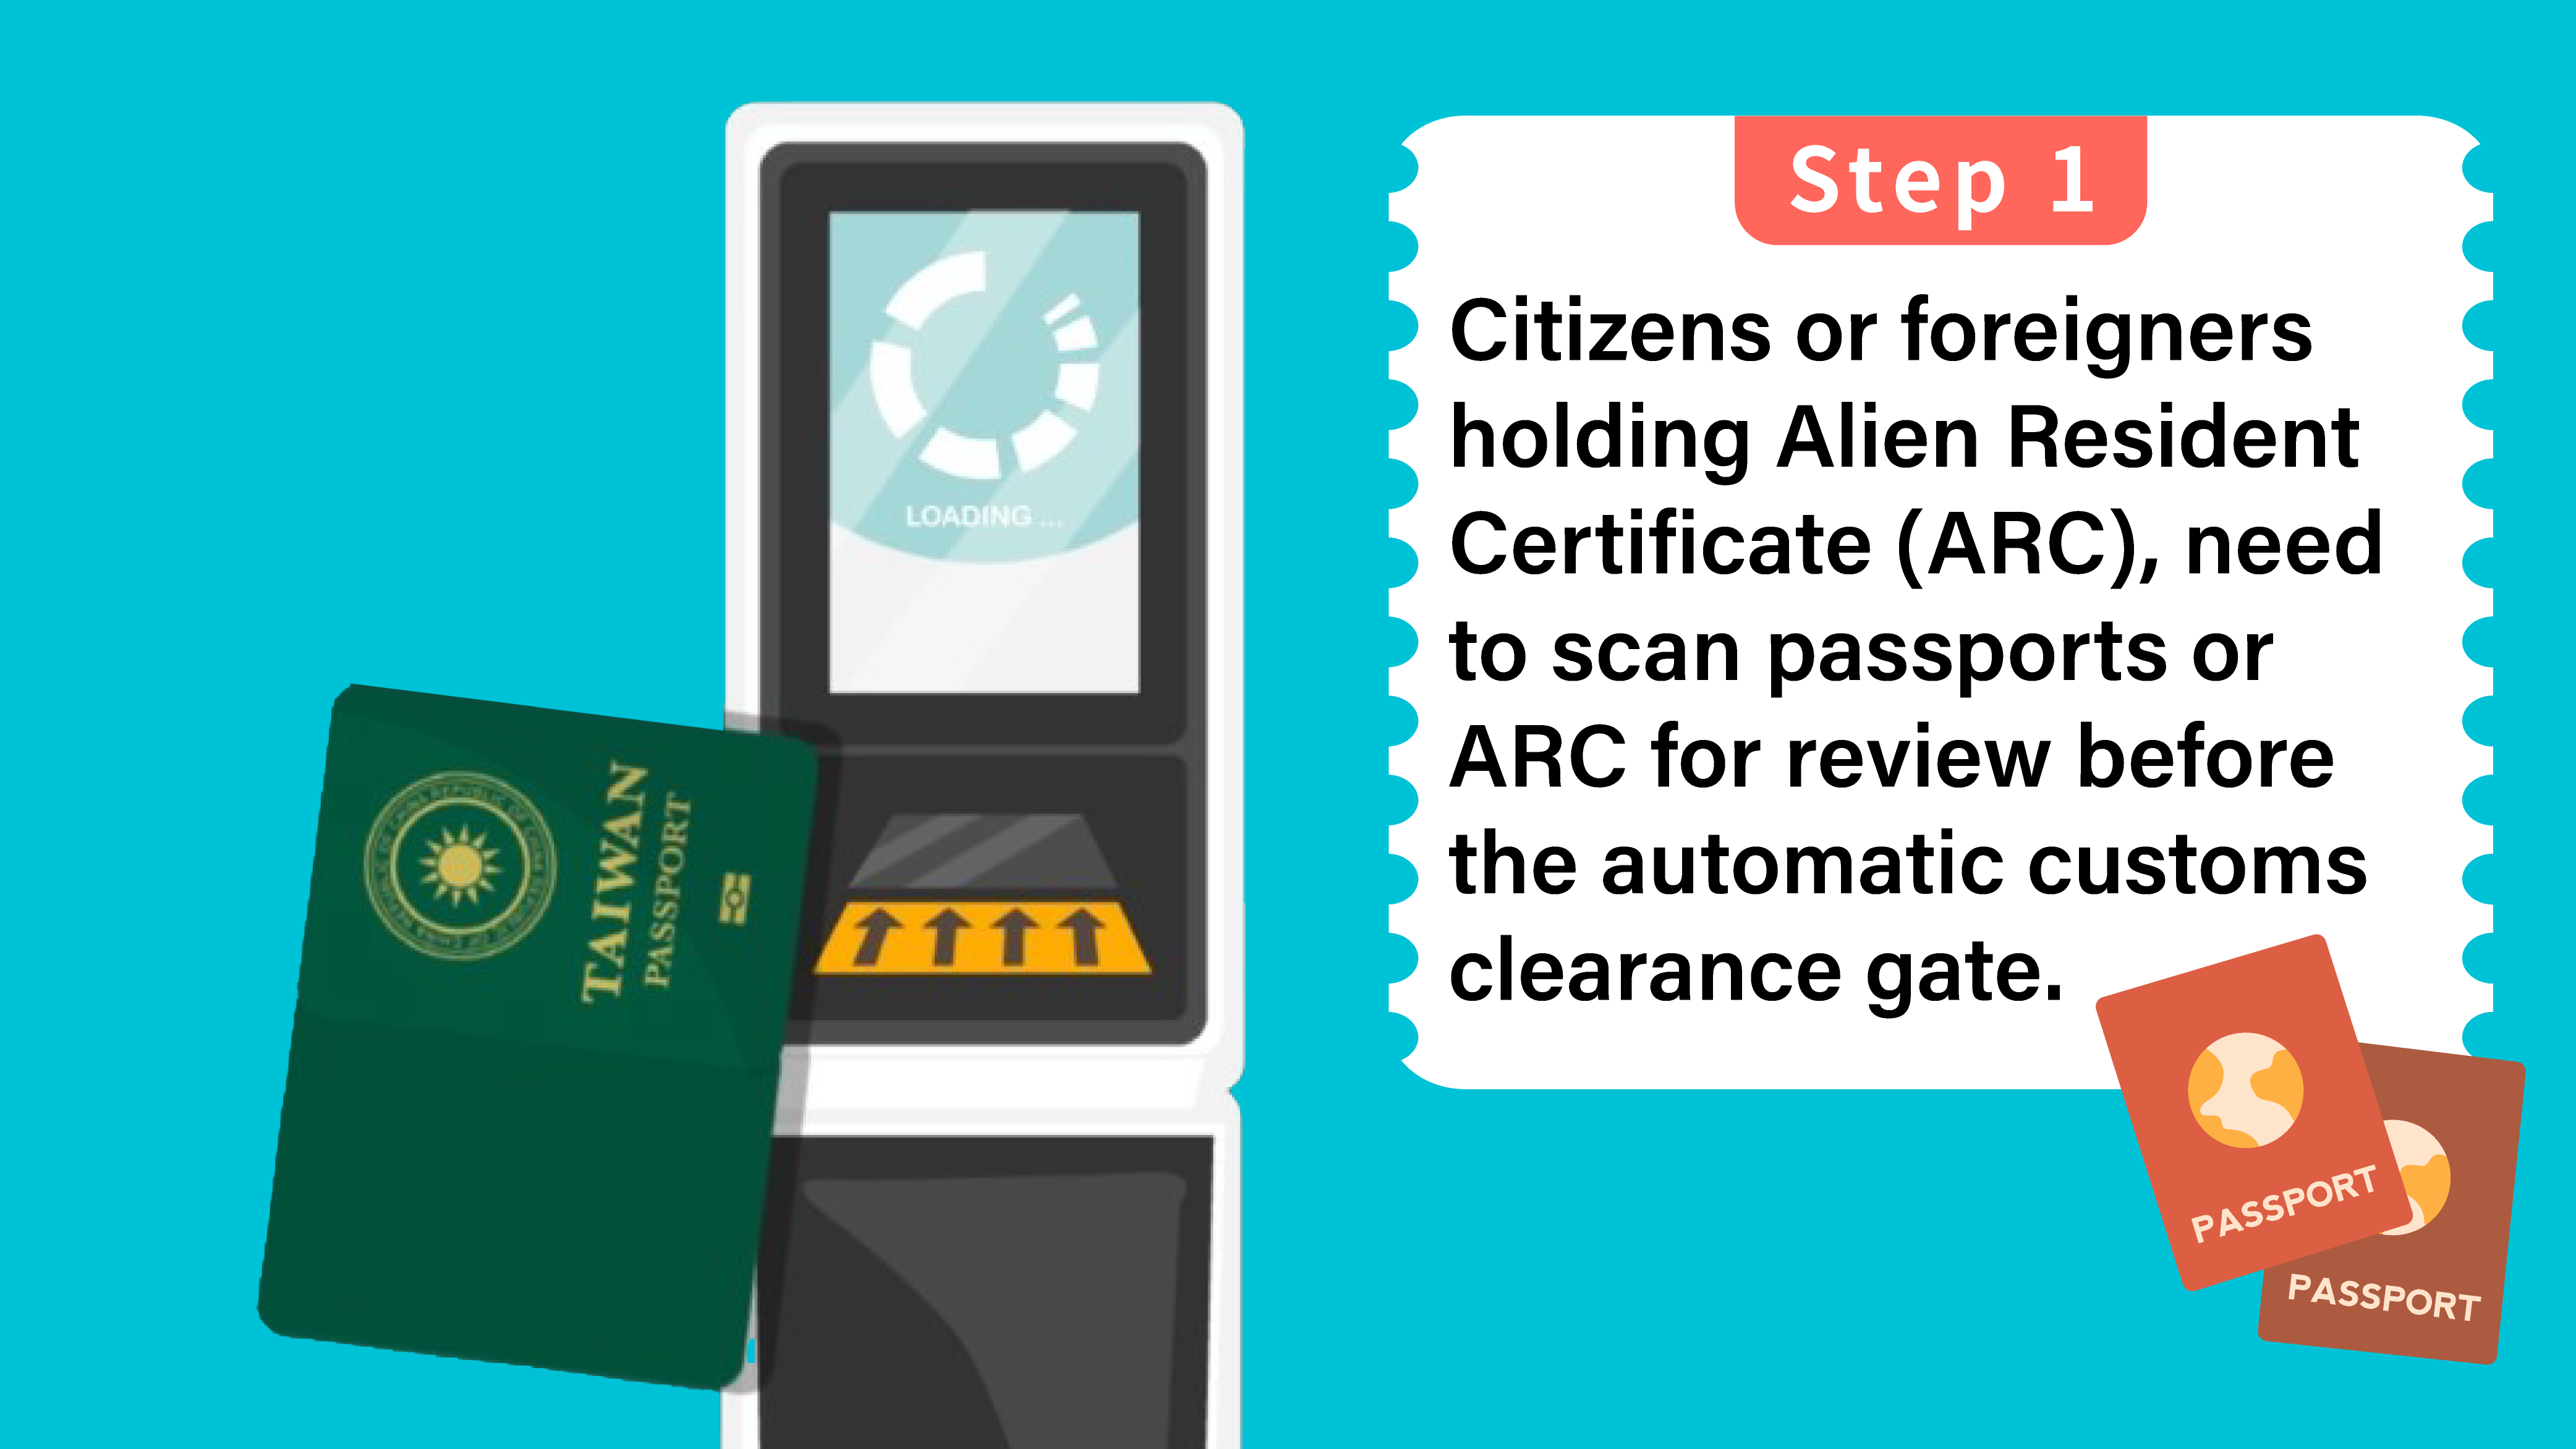 The general public are advised to take advantage of two-in-one upgraded service for registration and customs clearance when traveling on summer vocation